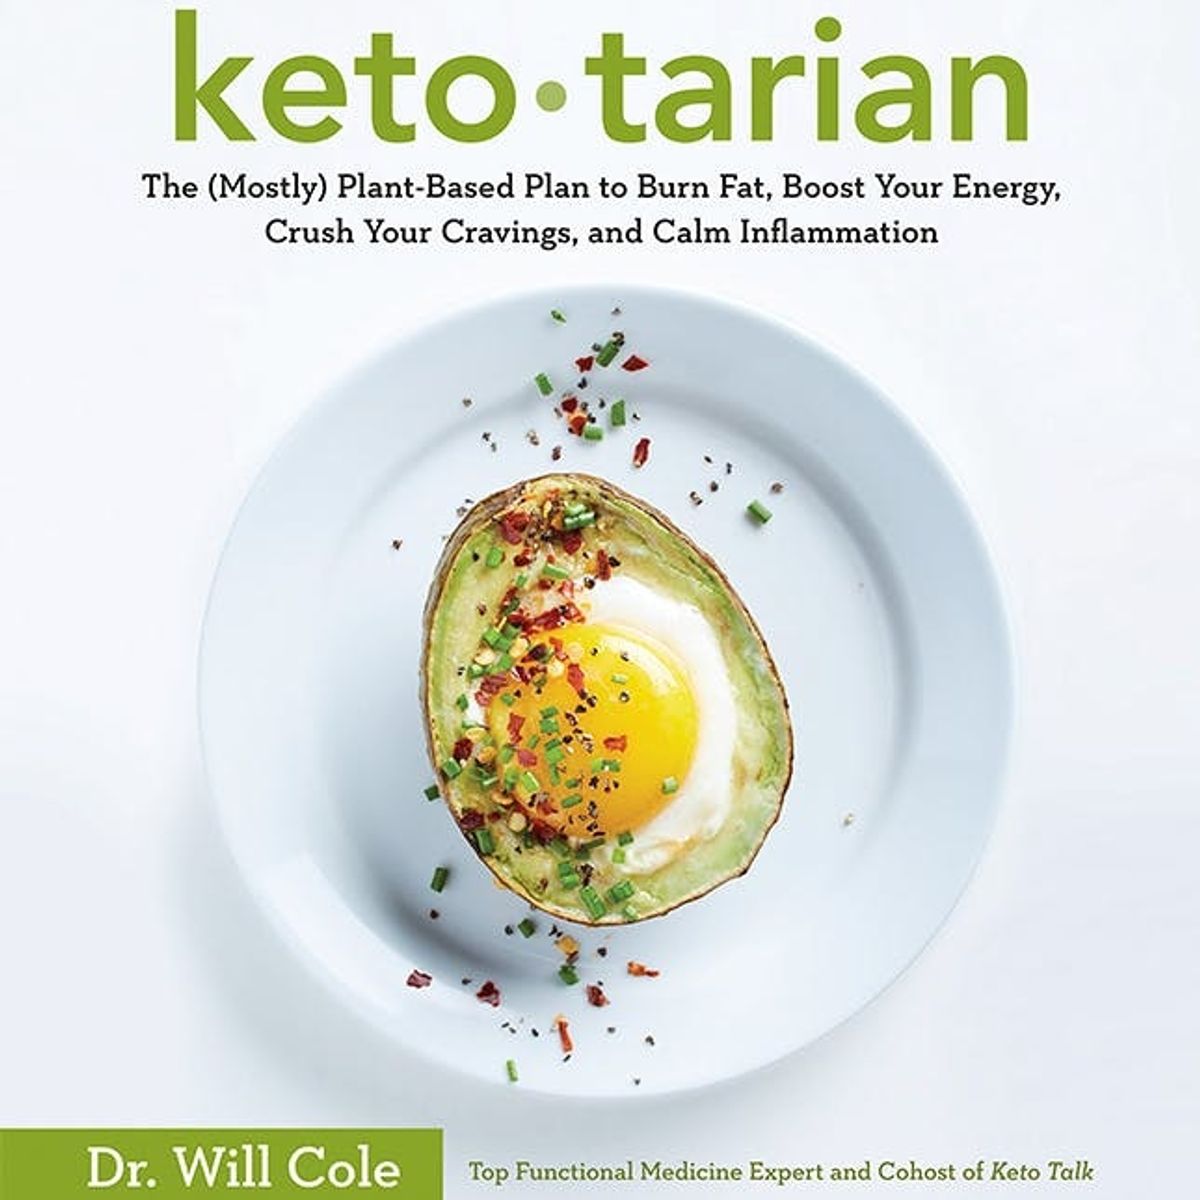 7 New Keto Cookbooks That You Need to Get, STAT